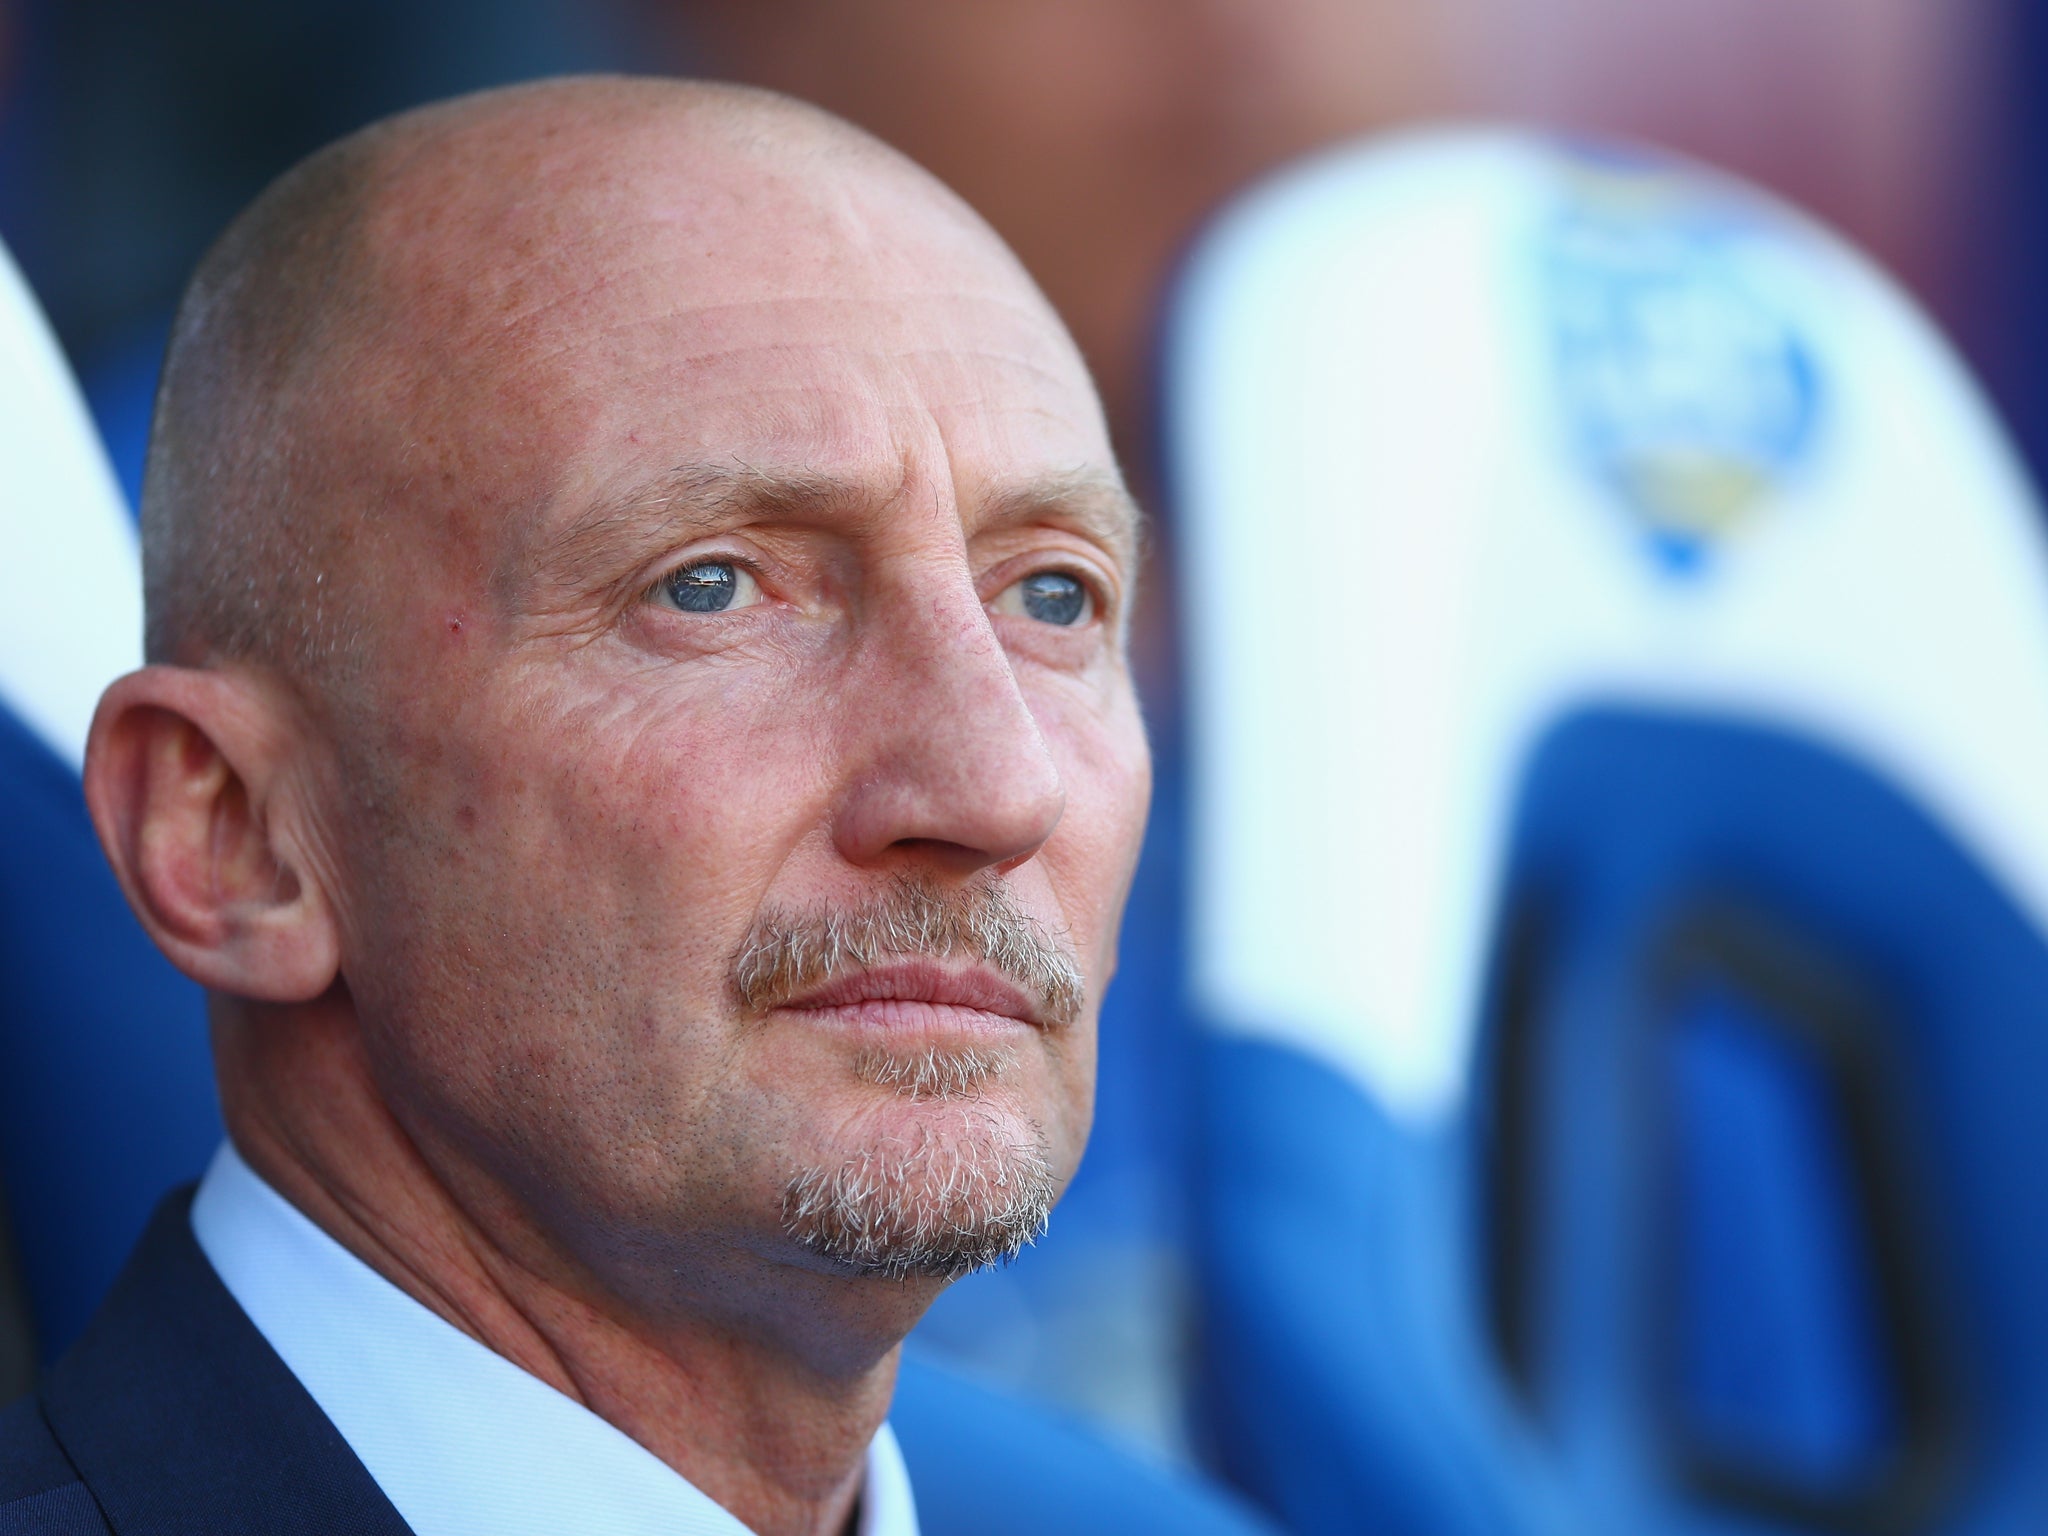 Ian Holloway was forced to watch his side face Manchester United from the stands